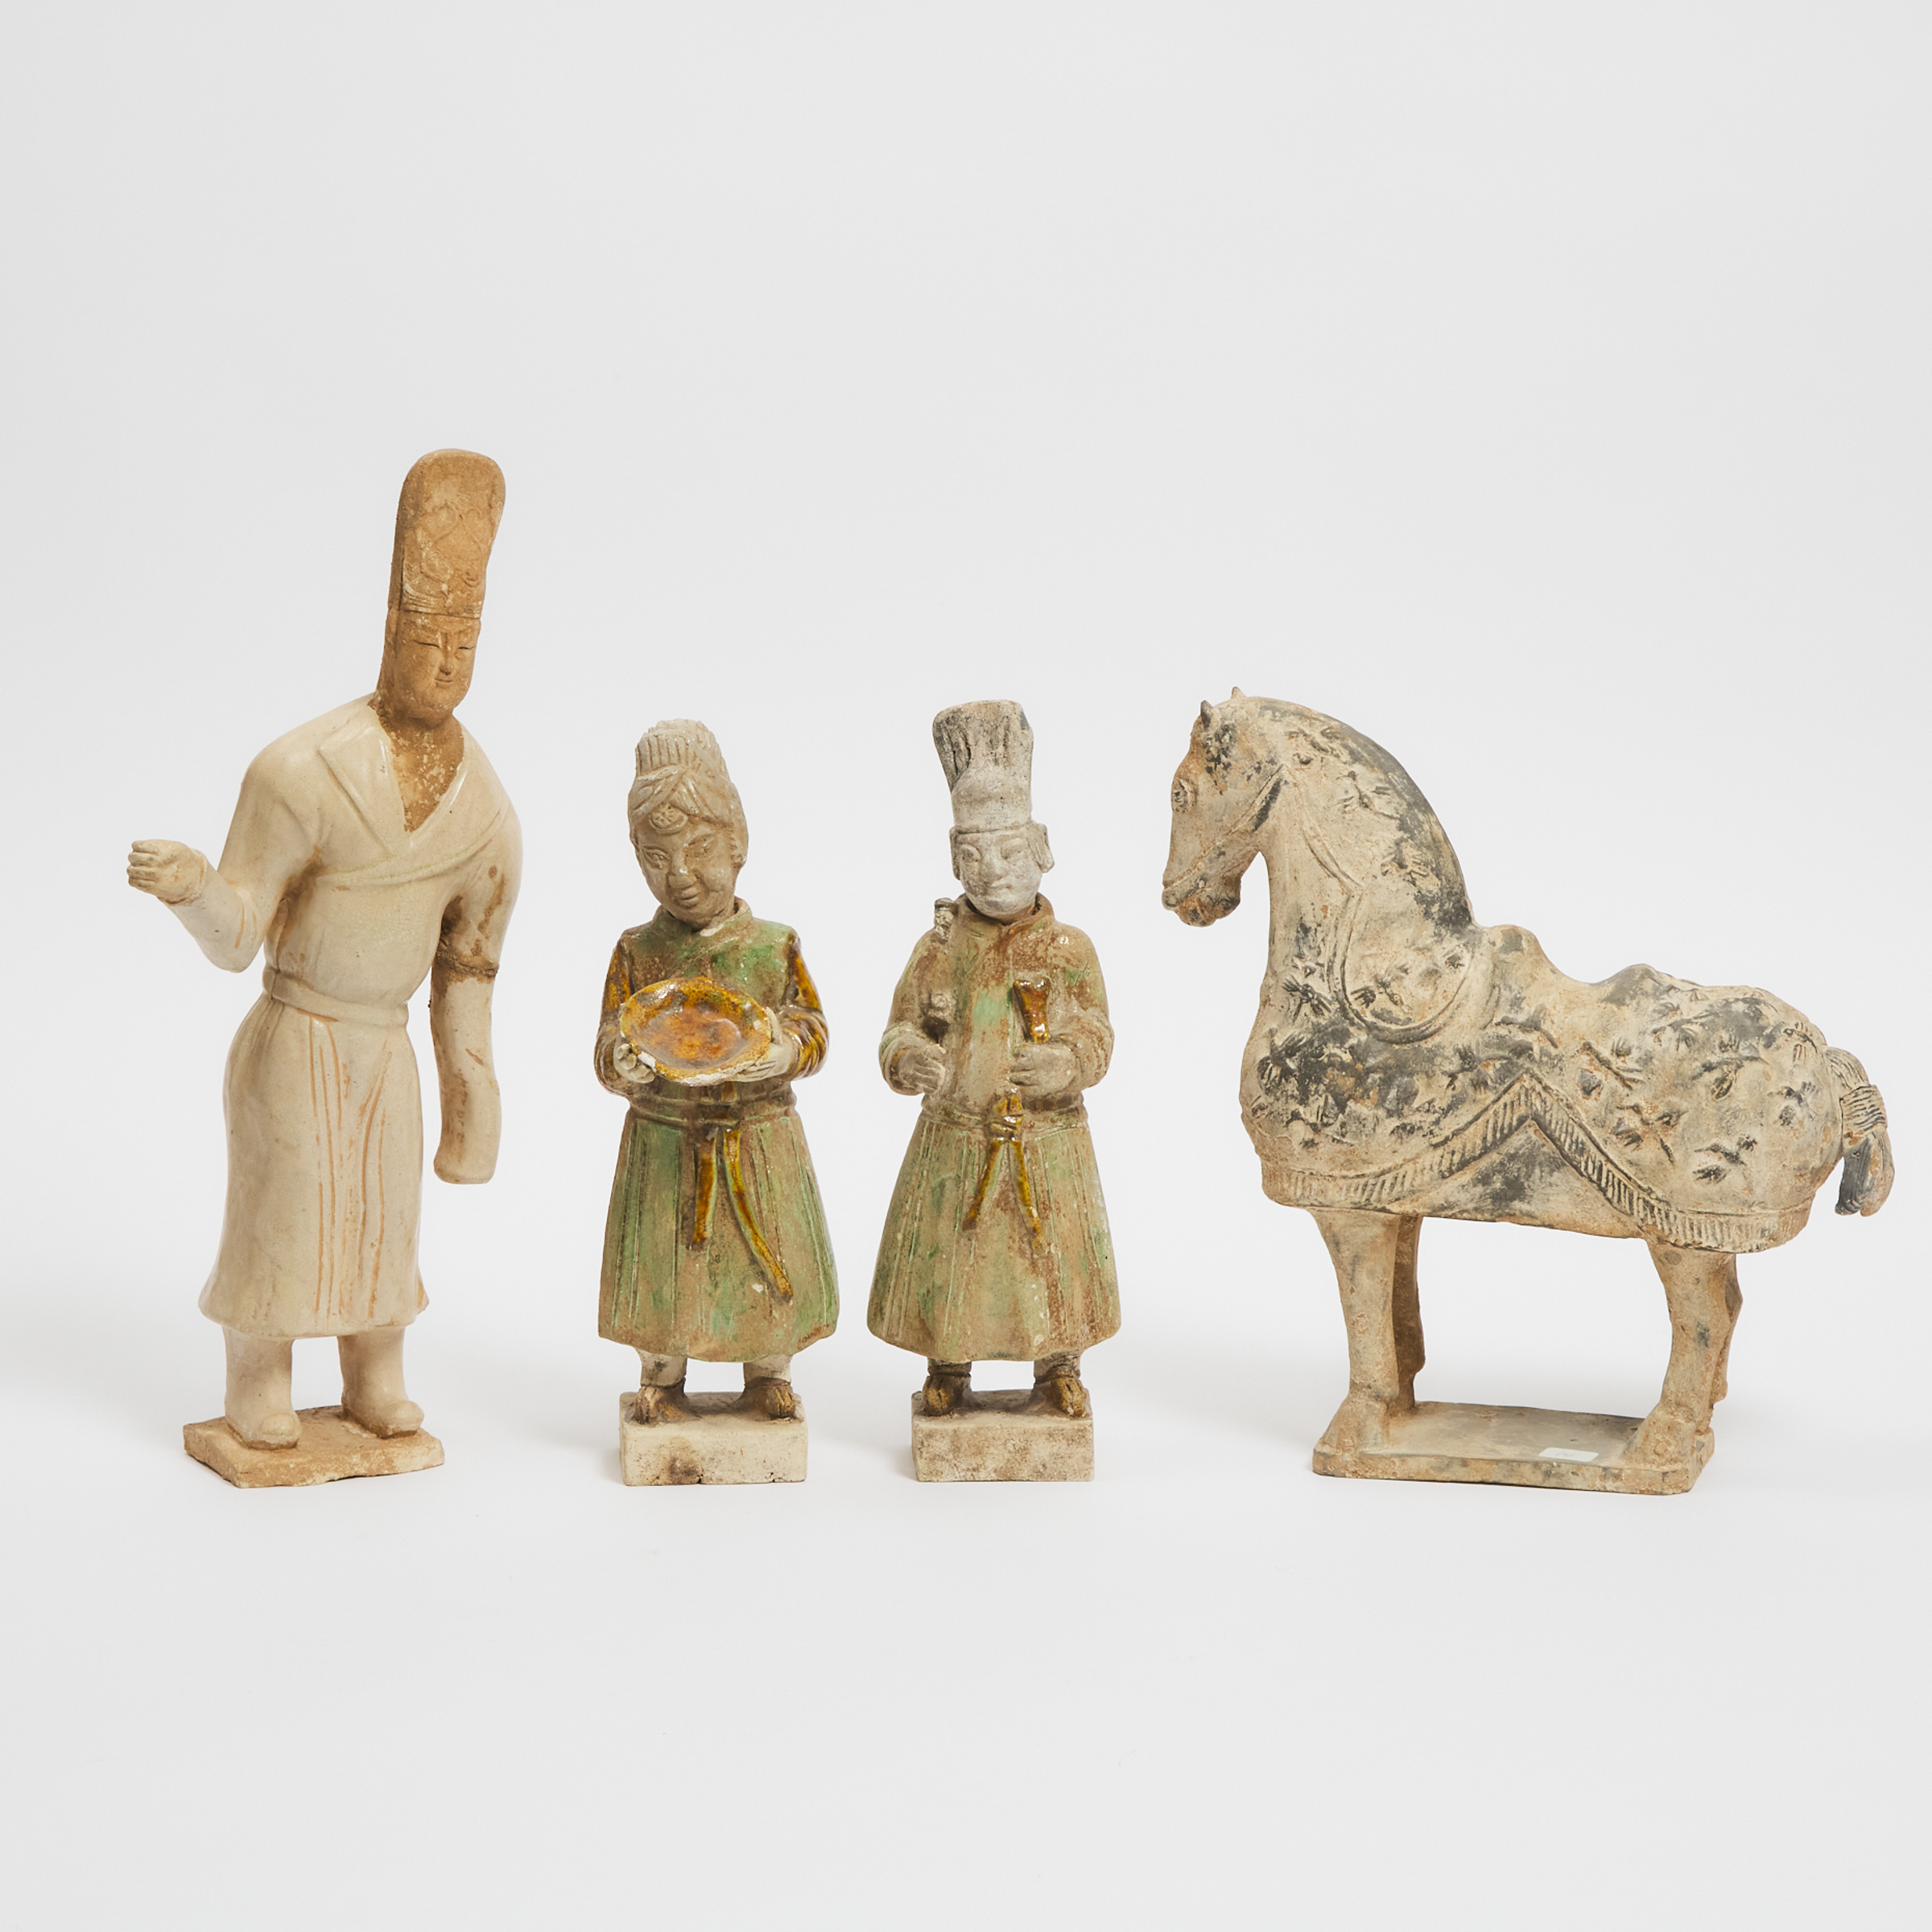 A Group of Four Painted Pottery Figures and Horse, Han Dynasty and Later